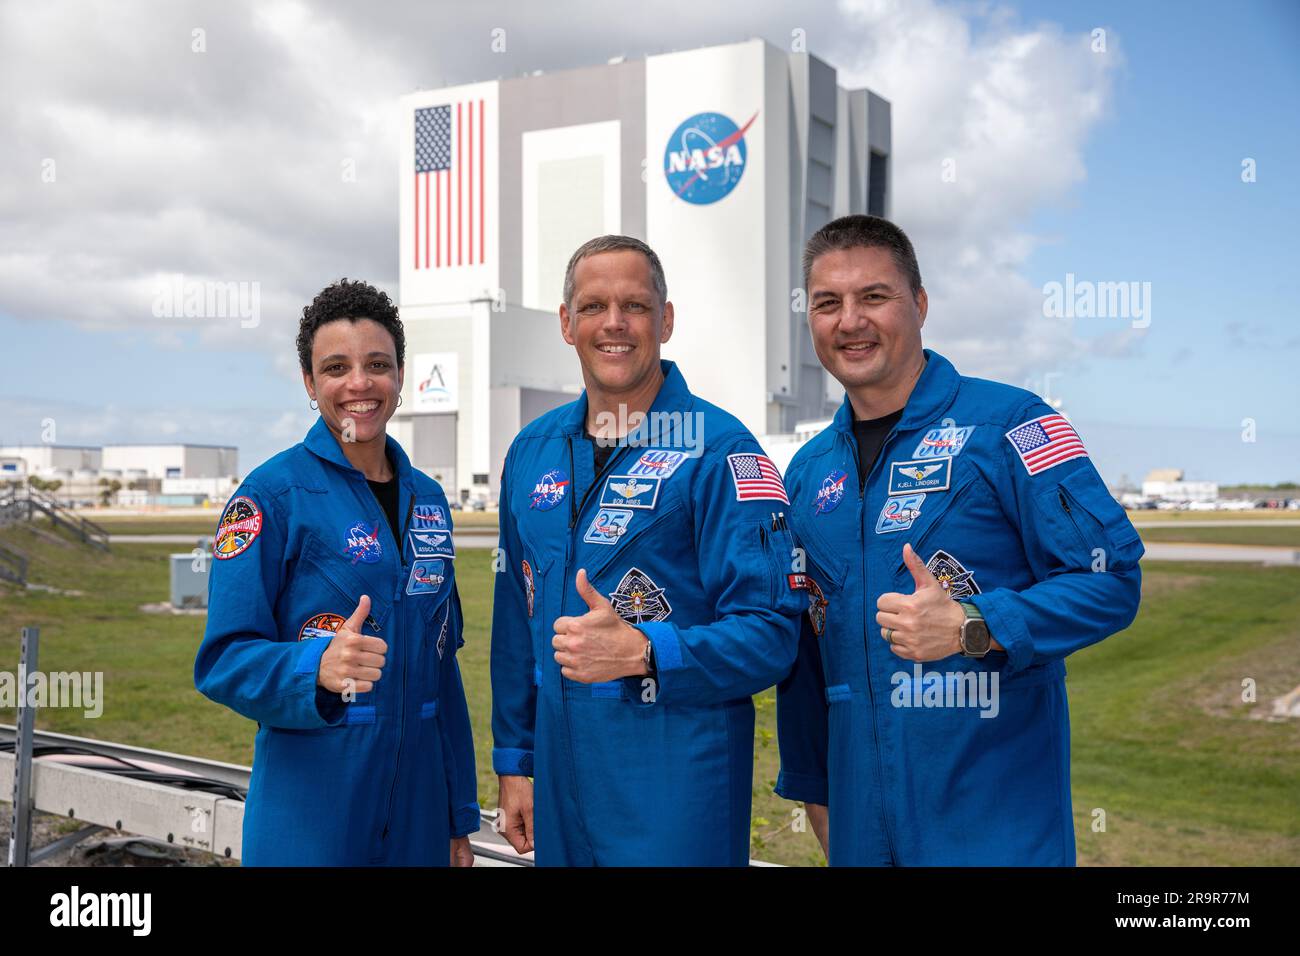 Crew-4 Astronauts Visit KSC. From left, NASA astronauts Jessica Watkins, Bob Hines, and Kjell Lindgren pose for a photo at the Press Site at NASA’s Kennedy Space Center during a visit to the Florida spaceport on March 22, 2023. The astronauts visited Kennedy to thank employees for supporting NASA’s SpaceX Crew-4 launch. Watkins, Hines, and Lindgren, along with ESA (European Space Agency) astronaut Samantha Cristoforetti, launched to the International Space Station aboard a SpaceX Crew Dragon spacecraft on April 27, 2022, from Kennedy’s Launch Complex 39A. The crew remained at the orbiting labo Stock Photo